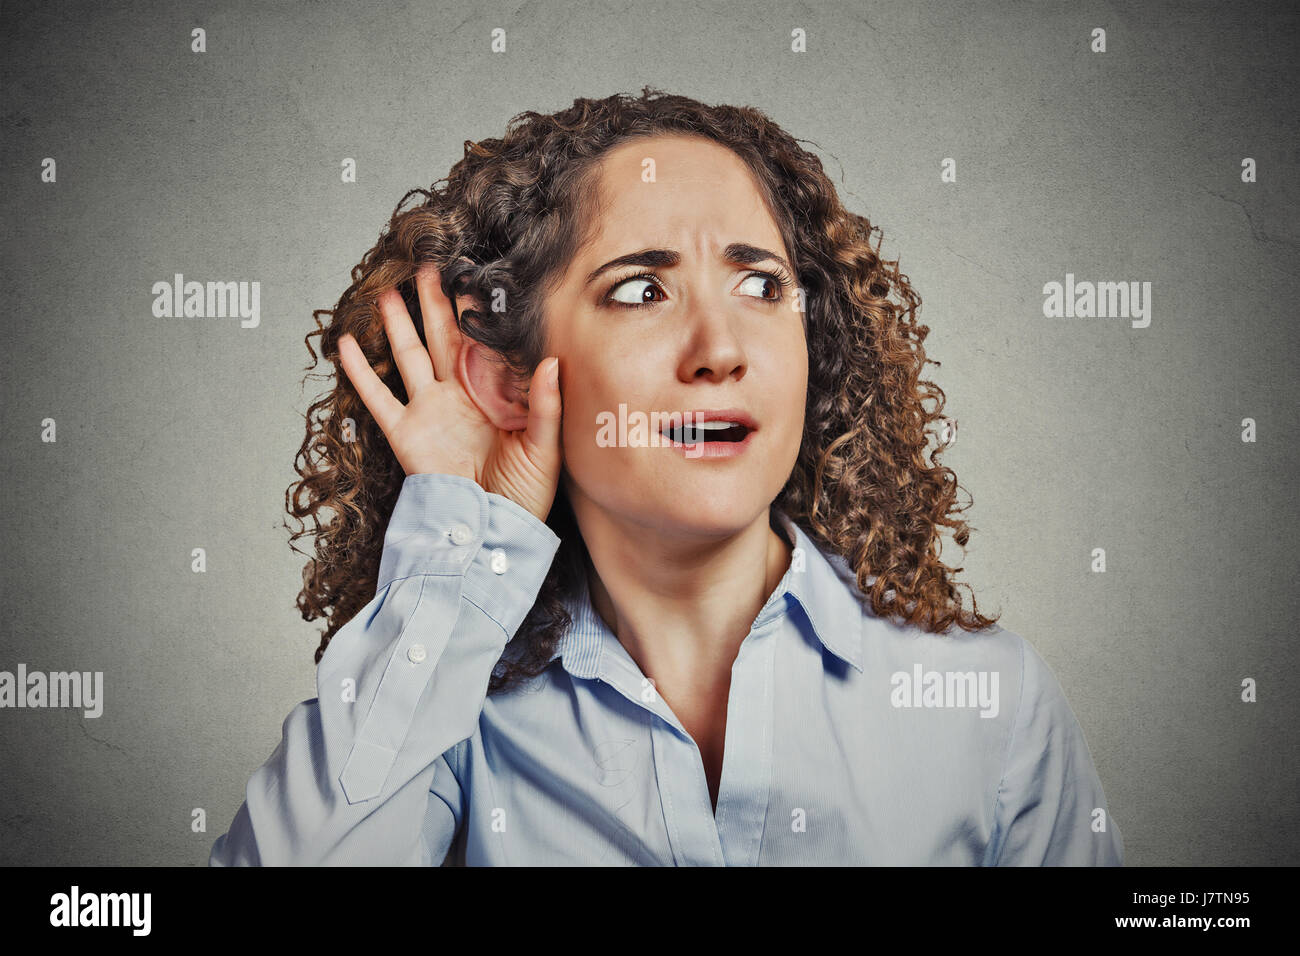 Closeup portrait surprised young nosy woman hand to ear gesture carefully intently secretly listening juicy gossip conversation news privacy violation Stock Photo